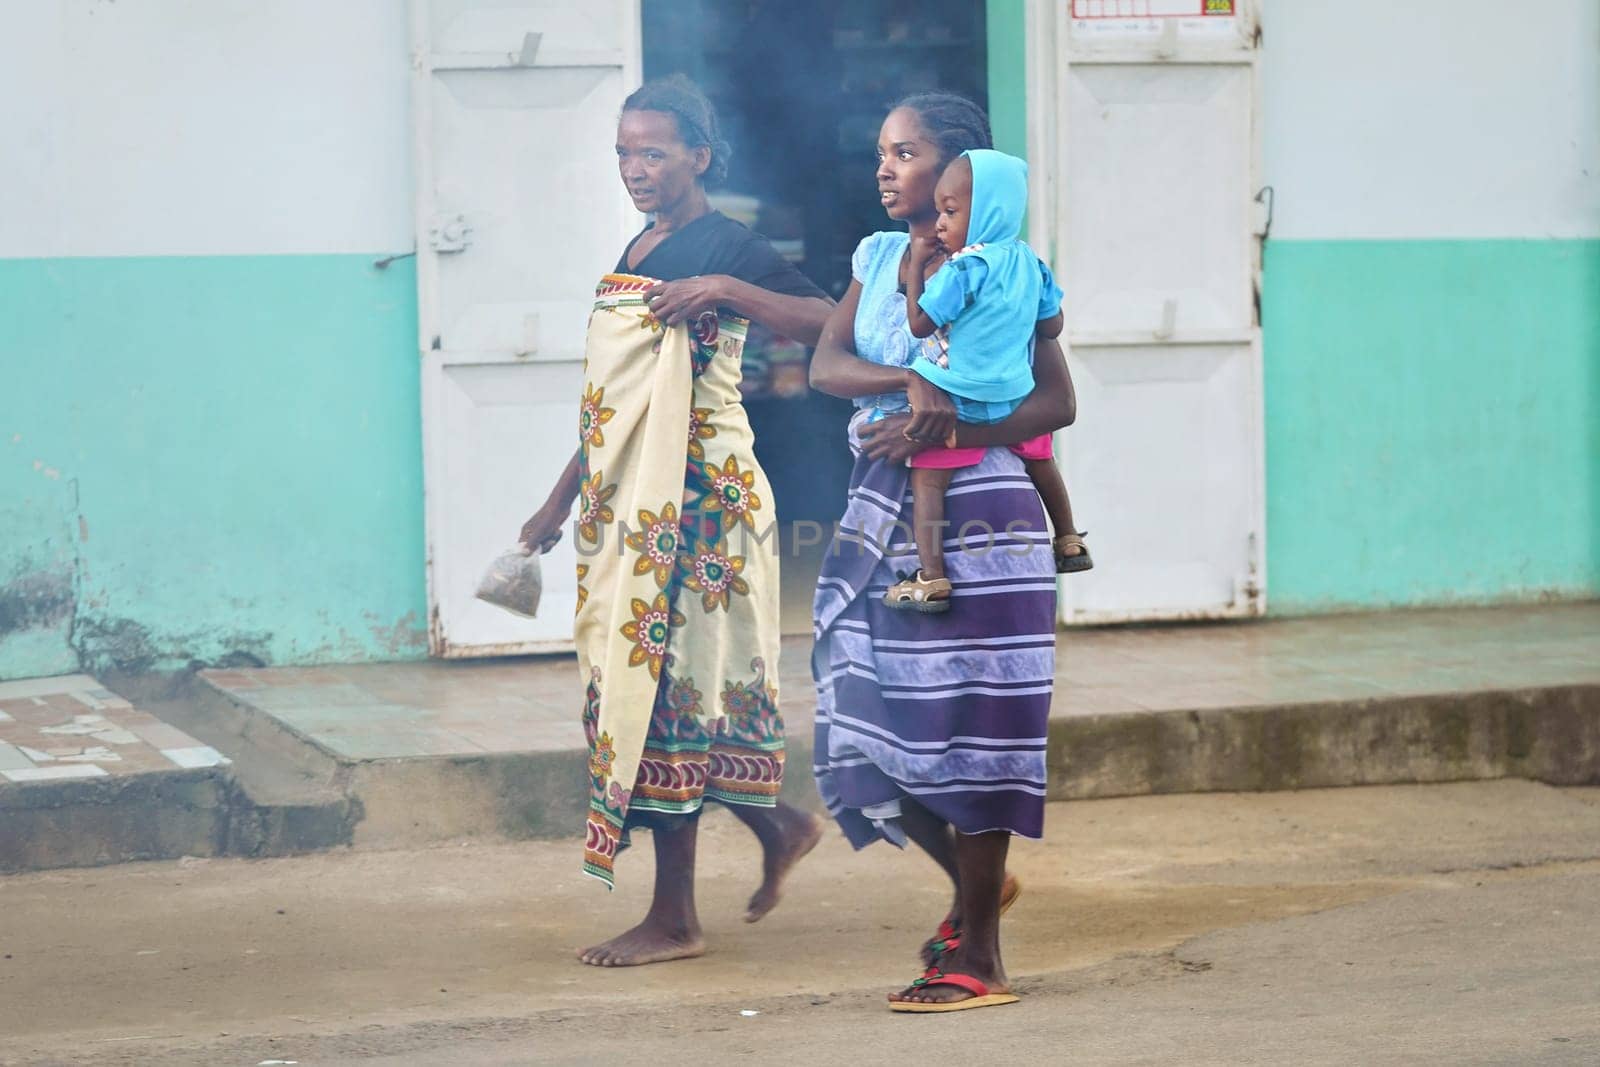 Ranohira, Madagascar - April 29, 2019: Two unknown Malagasy women walking on main street, one carrying her baby. People of Madagascar are poor but look content nevertheless by Ivanko